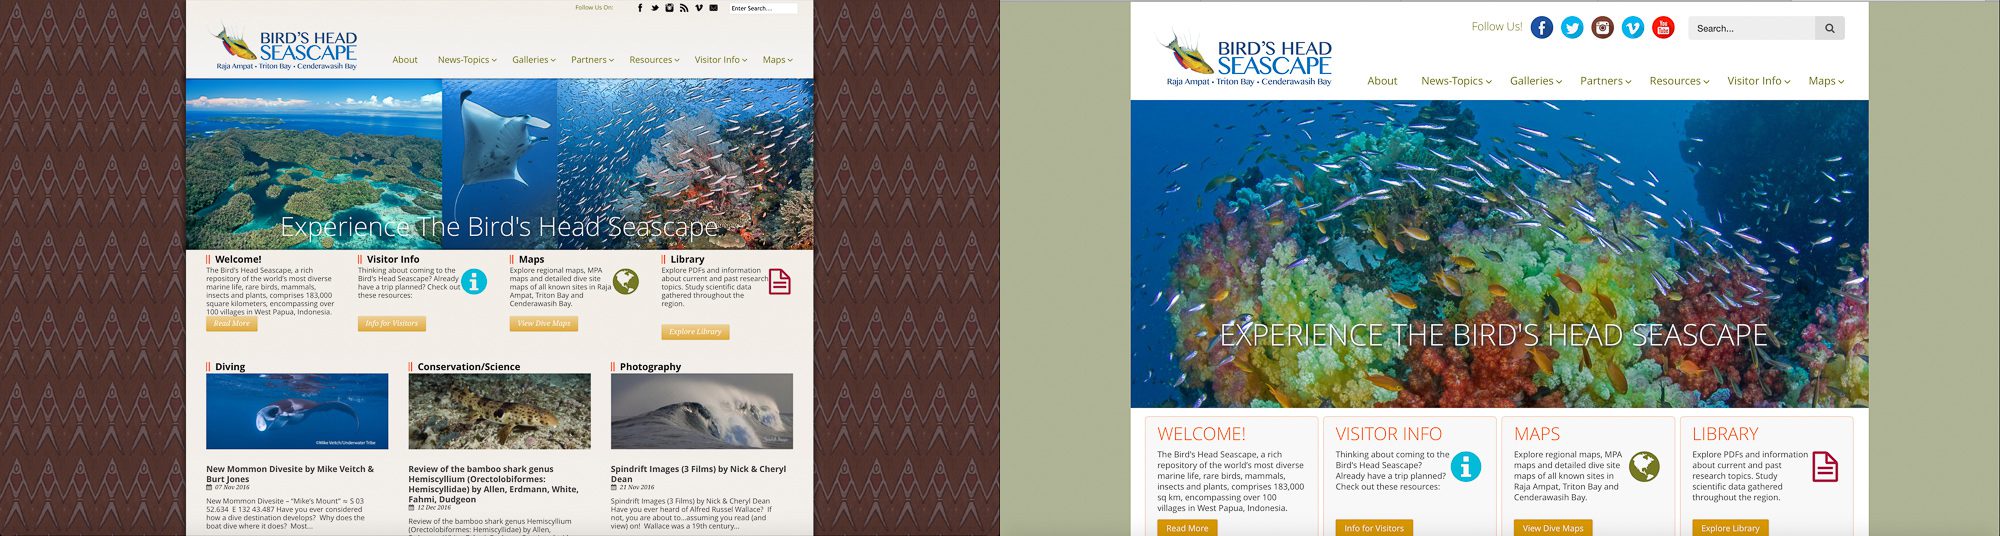 Newmediasoup-Birds-Head-Seascape-Home-Page-Before-After